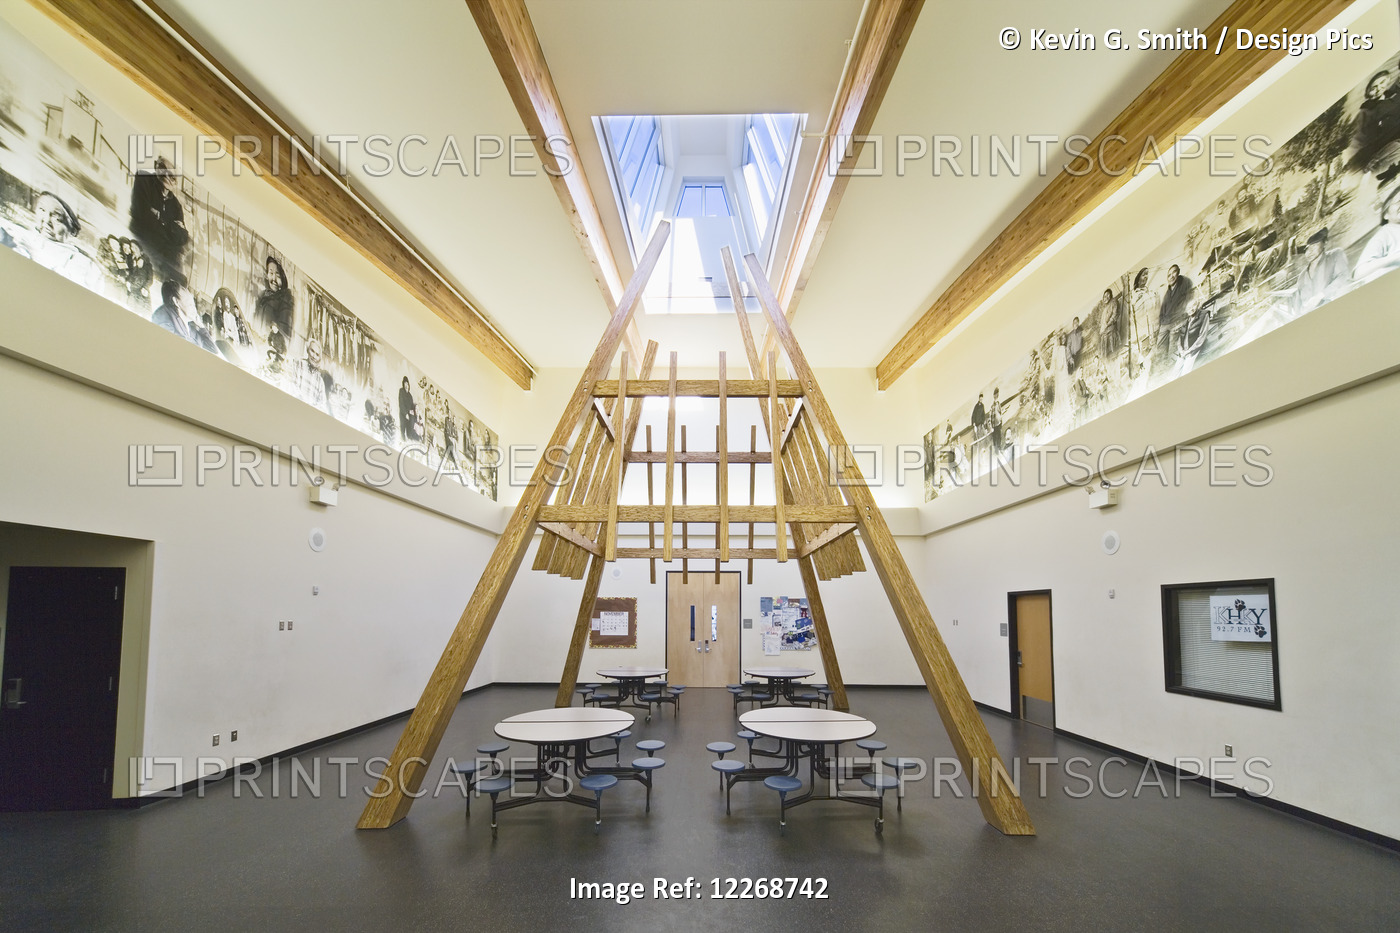 Multipurpose Room In The Akiak K-12 Public School With A Large Scale Mural ...